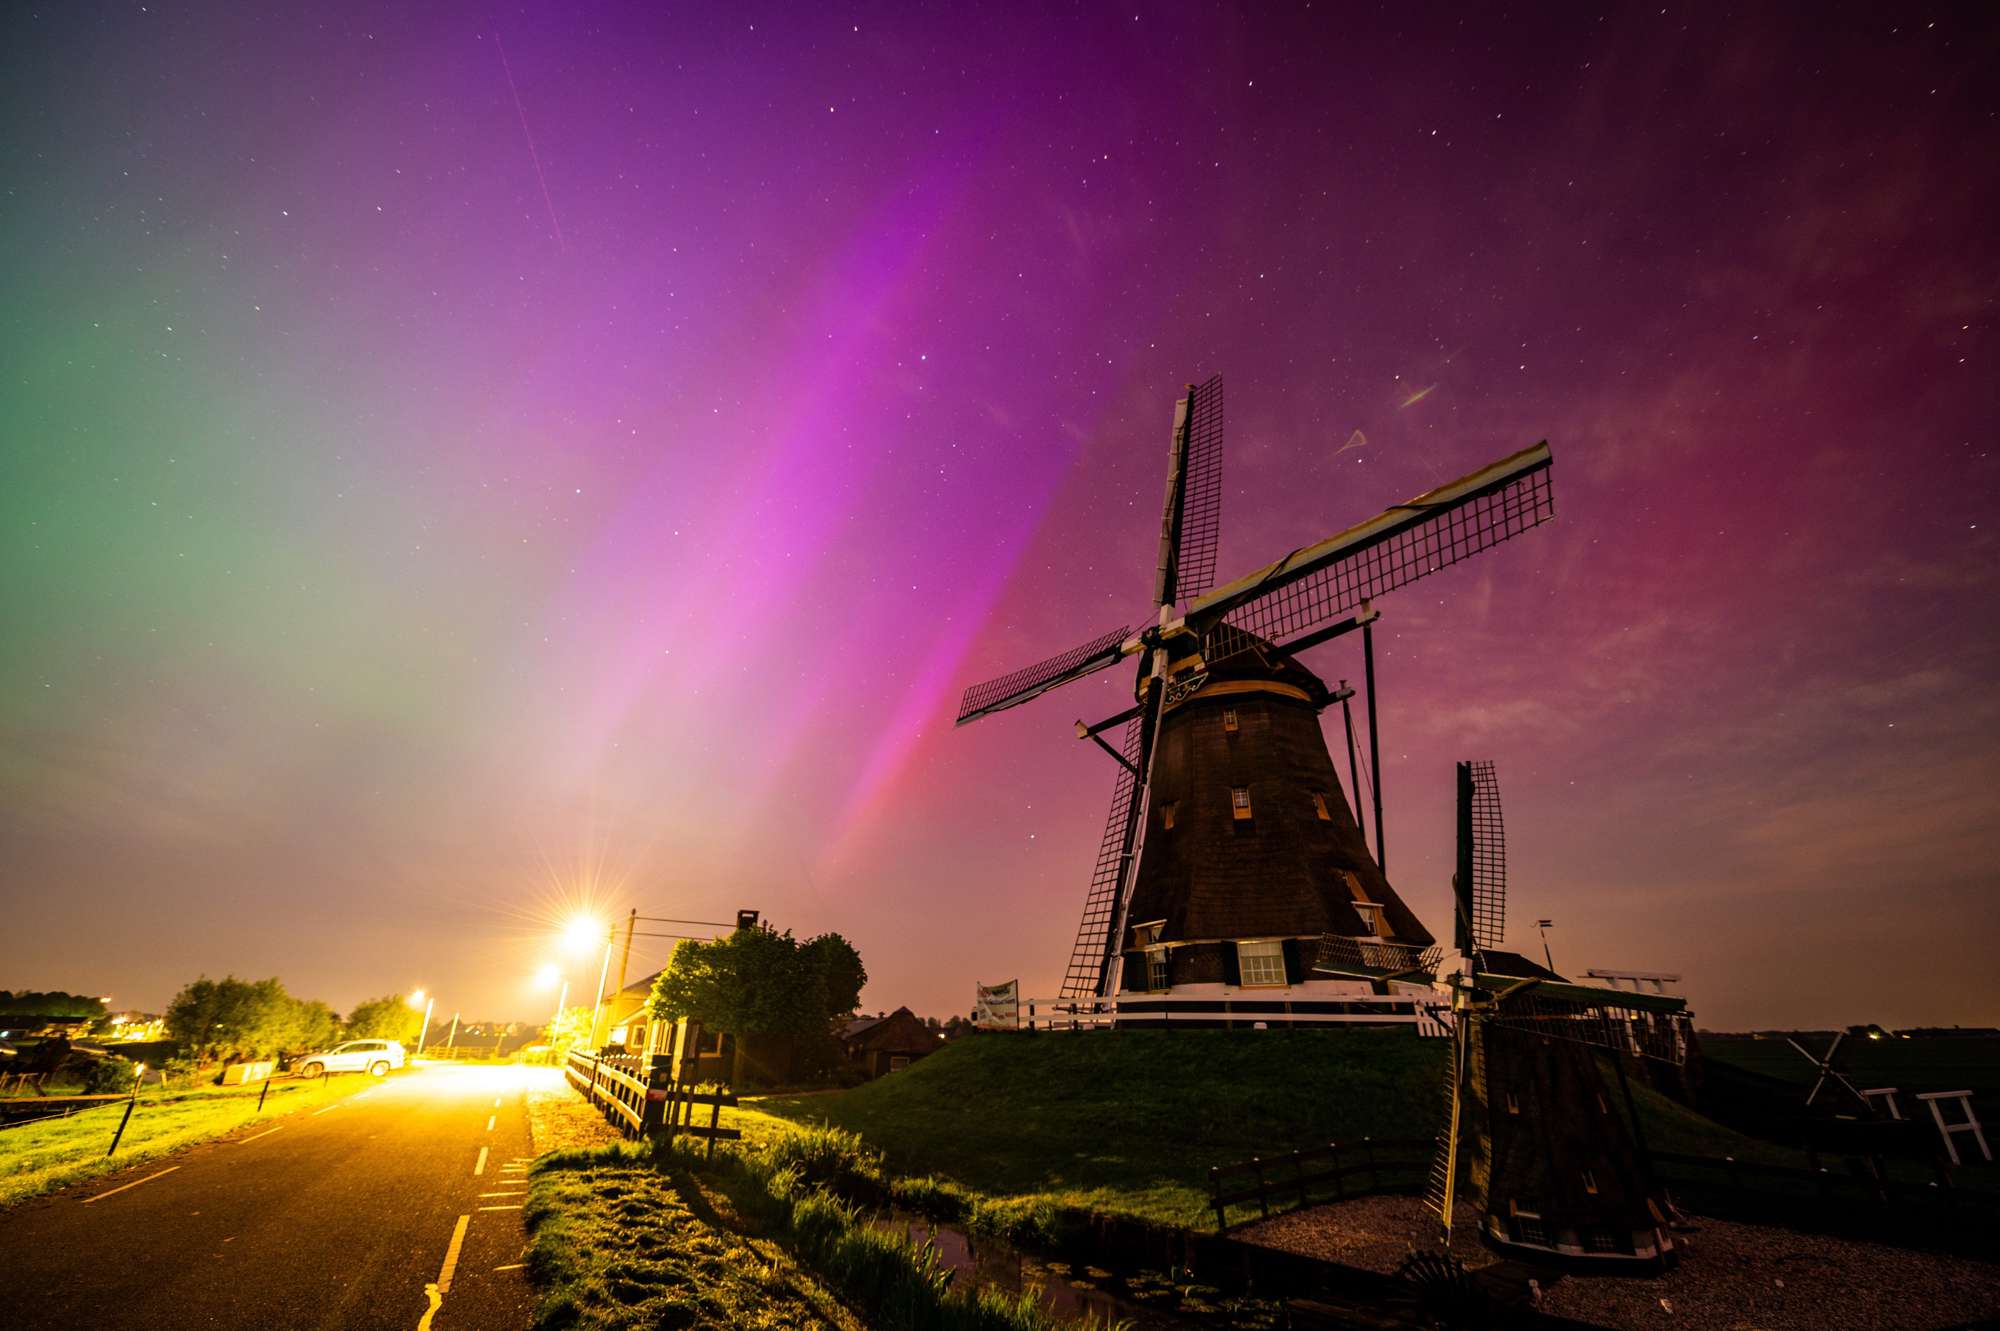 AARLANDERVEEN - The northern lights can be clearly seen above the Molenviergang of Aarlanderveen. ANP JOSH WALET netherlands out - belgium out(Photo by Josh Walet/ANP/Sipa USA)